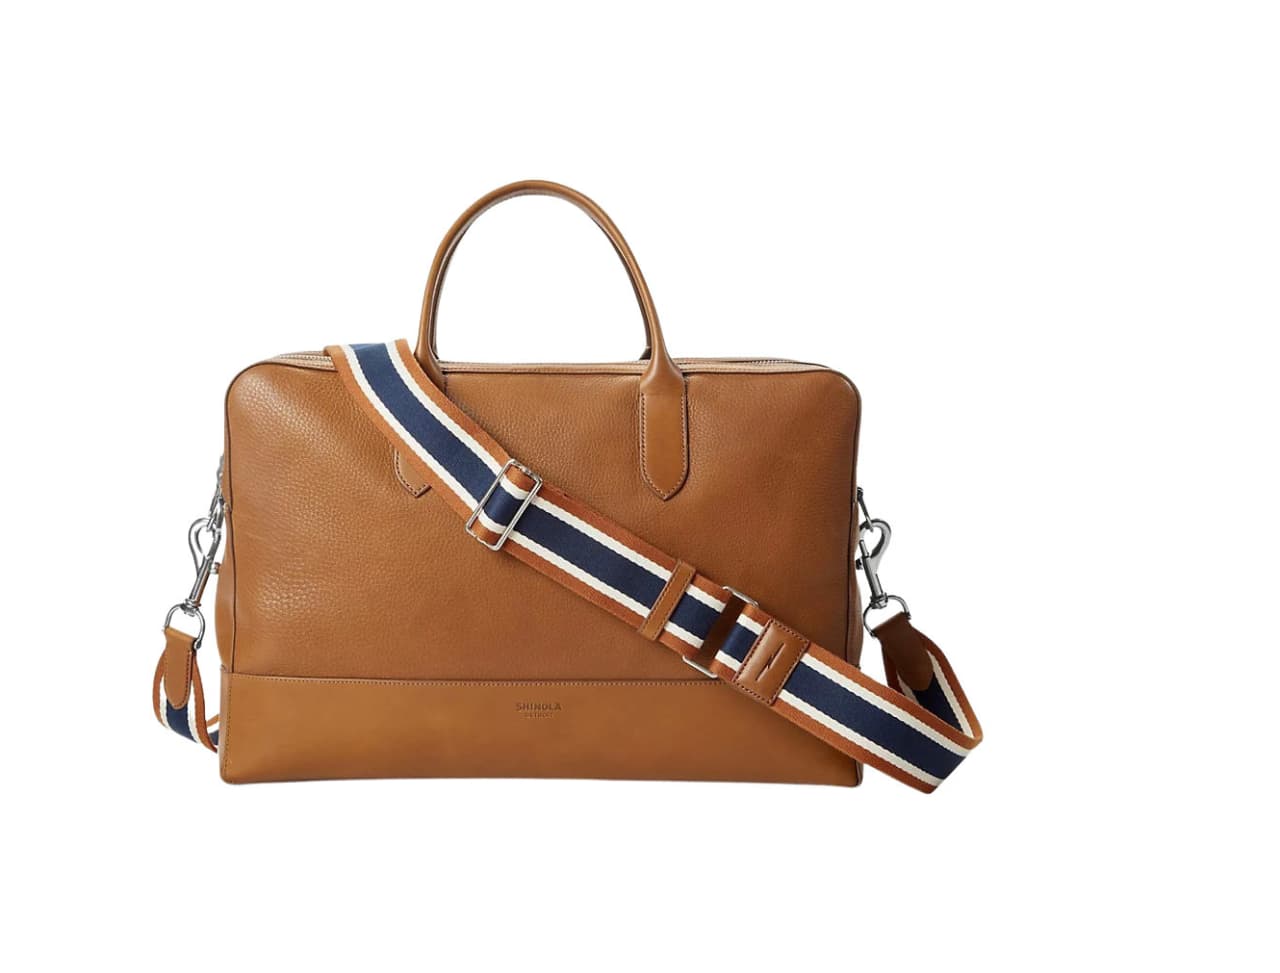 29 Bags That Are Perfect for Work or Travel